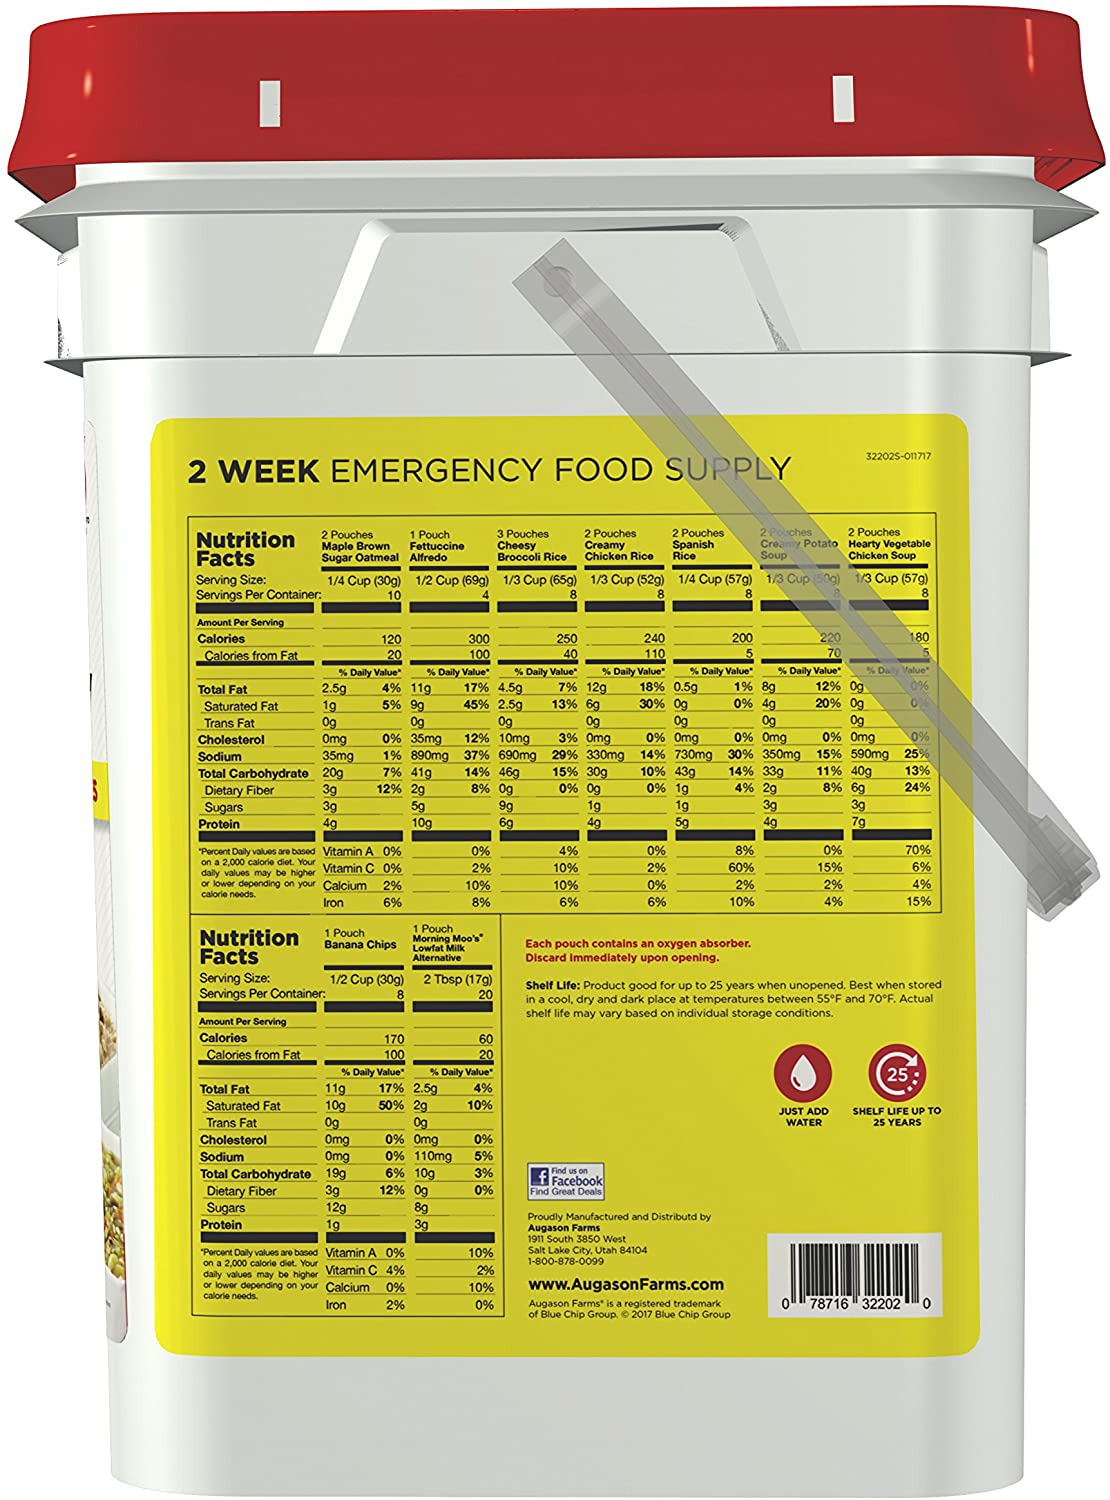 Augason Farms 2-Week Emergency Food Storage Supply Kit with red lid.